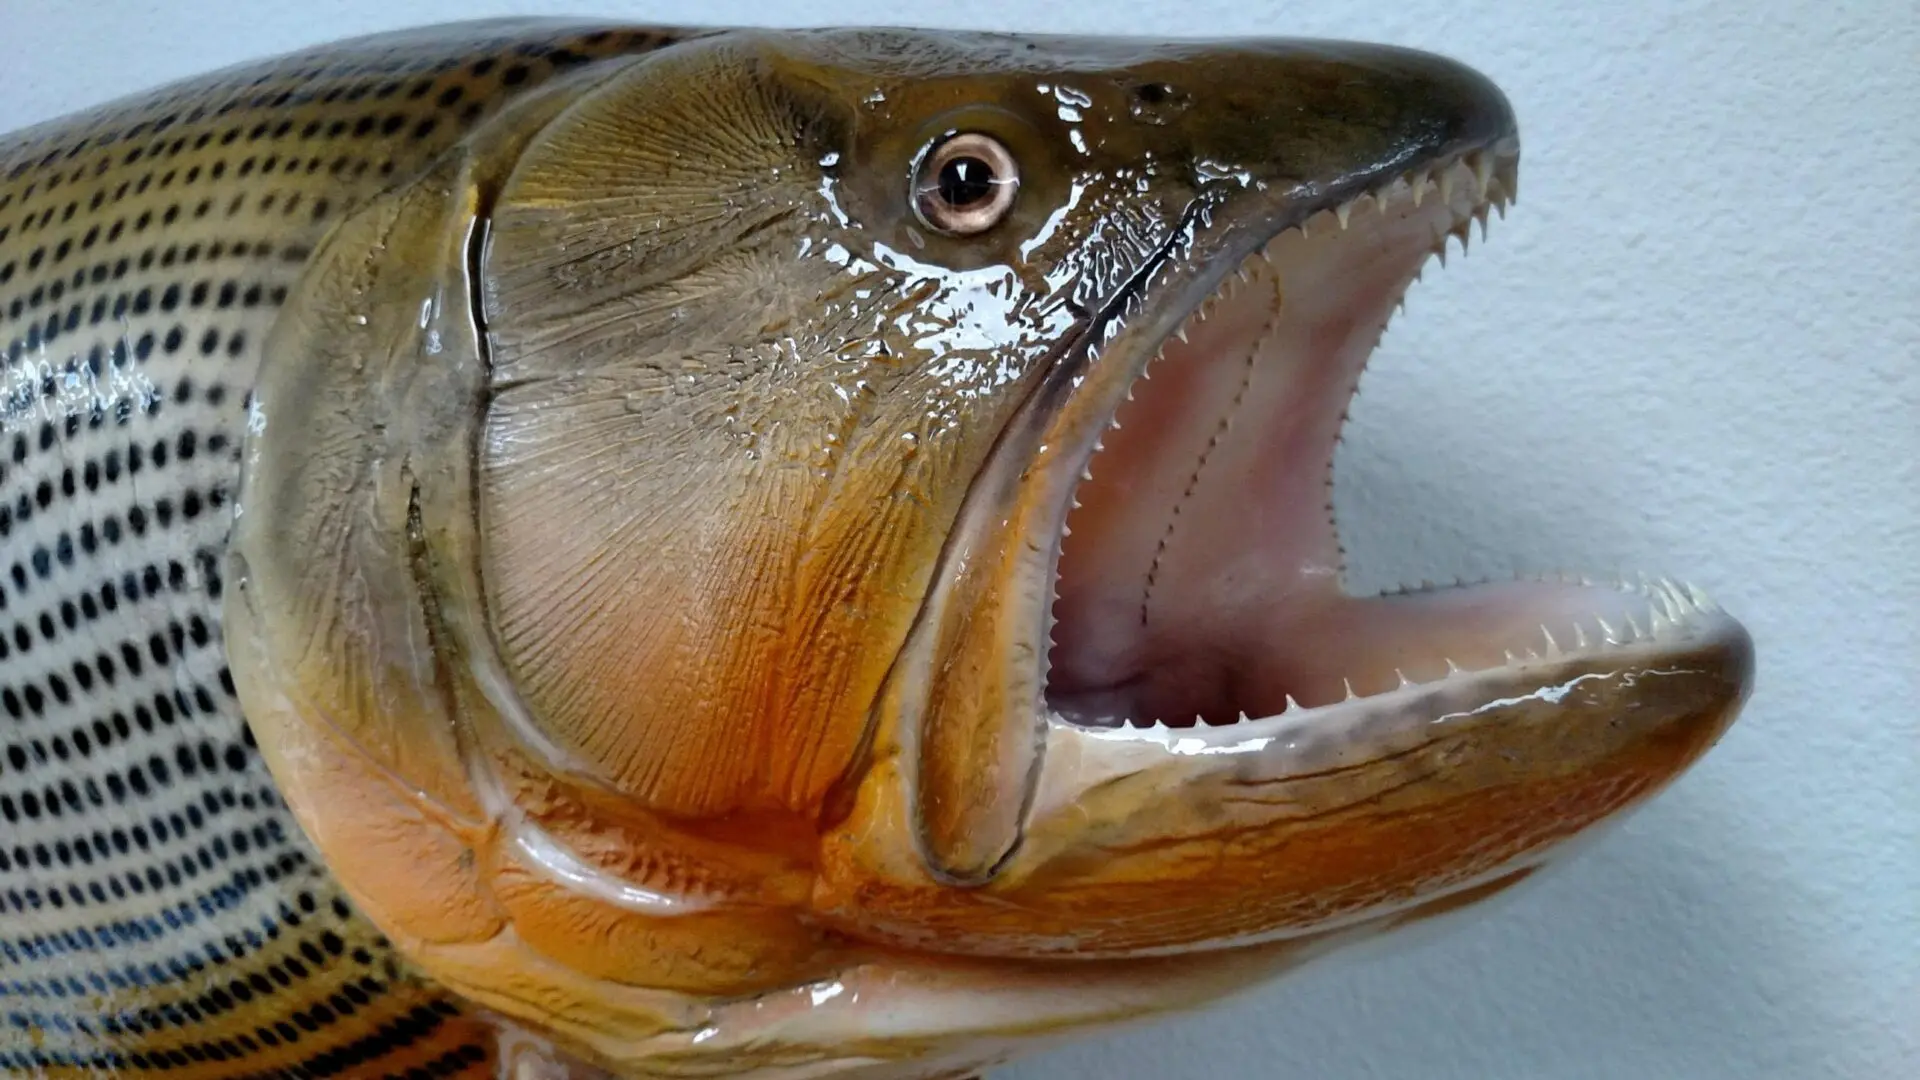 The close view of the face of the fish taxidermy